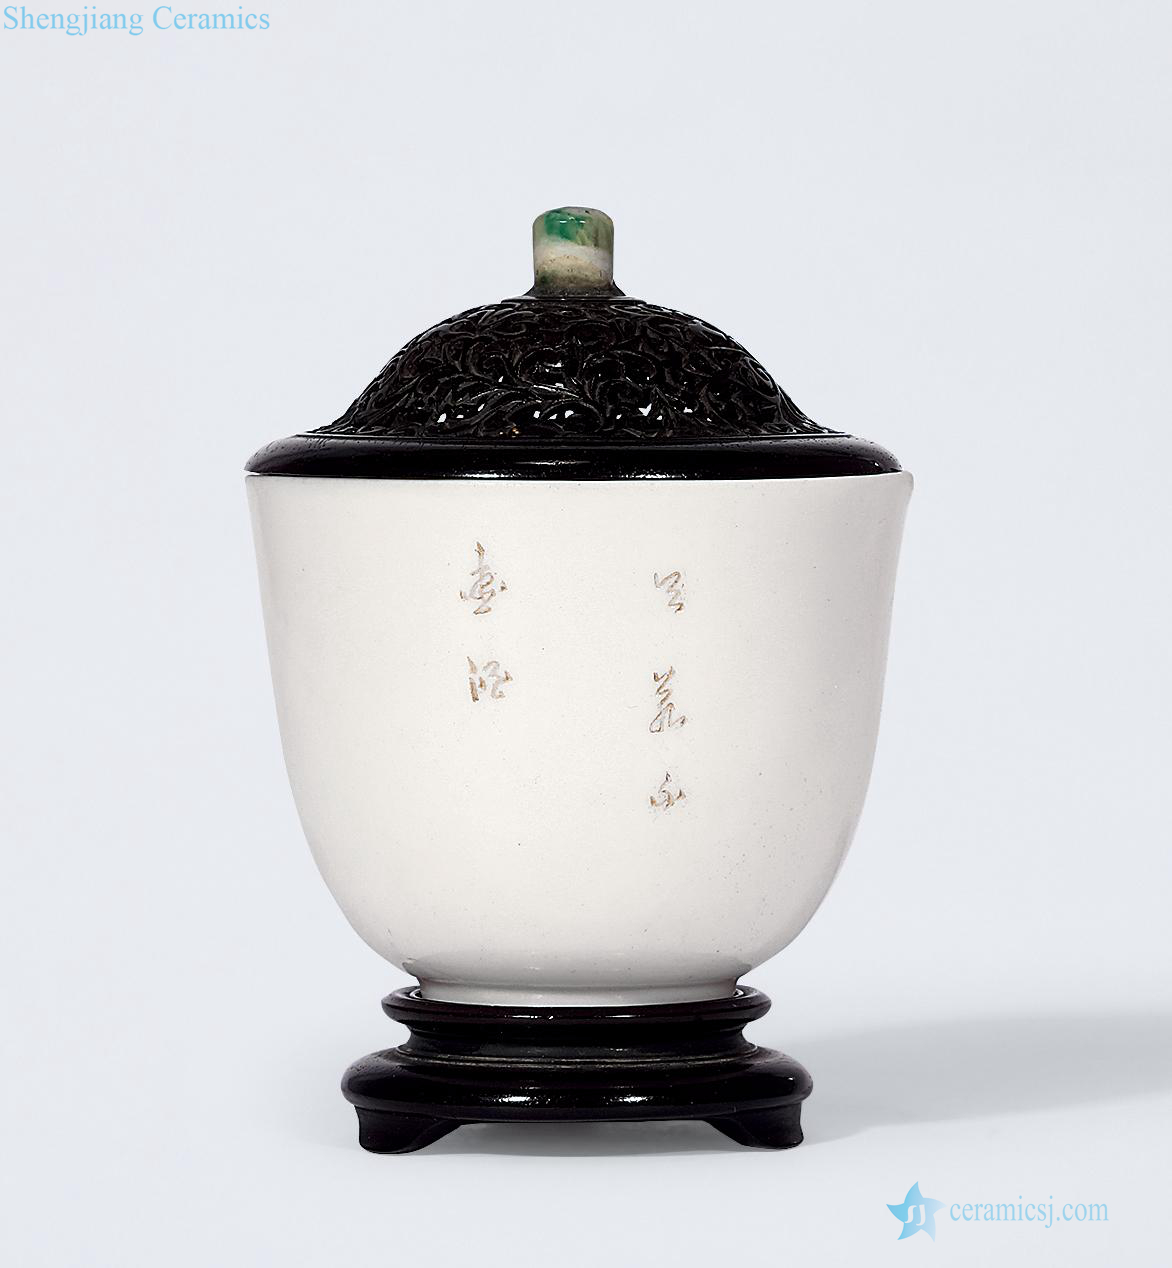 The late Ming dynasty dehua poetry cup